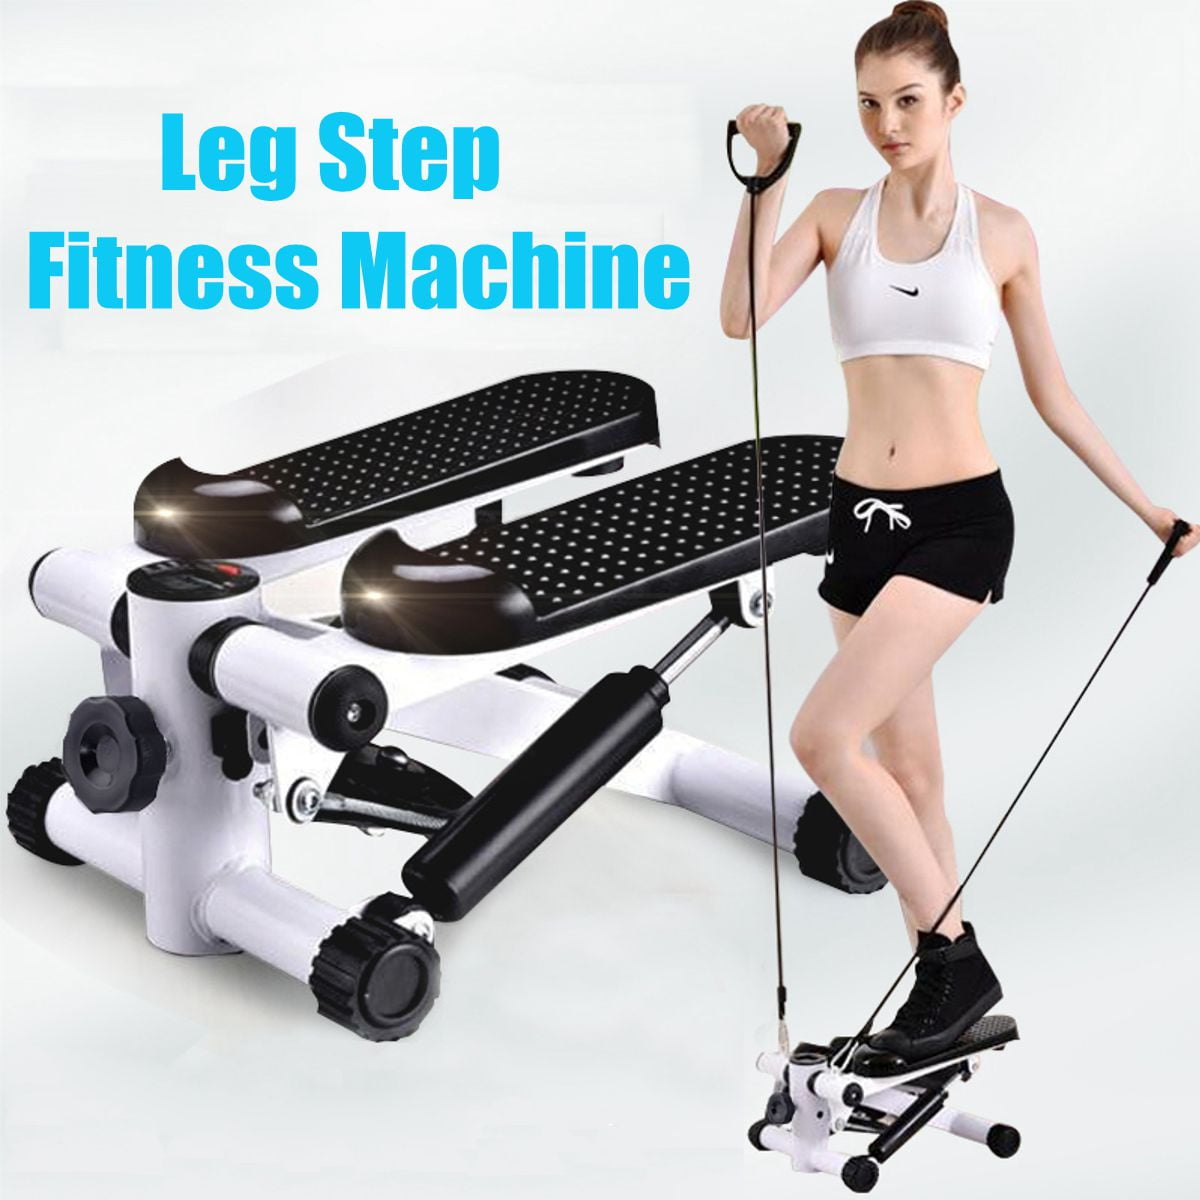 Printasaurus Premium Portable Twist Stair Stepper Adjustable Resistance Twisting Step Fitness Machine with Bands and LCD Monitor 